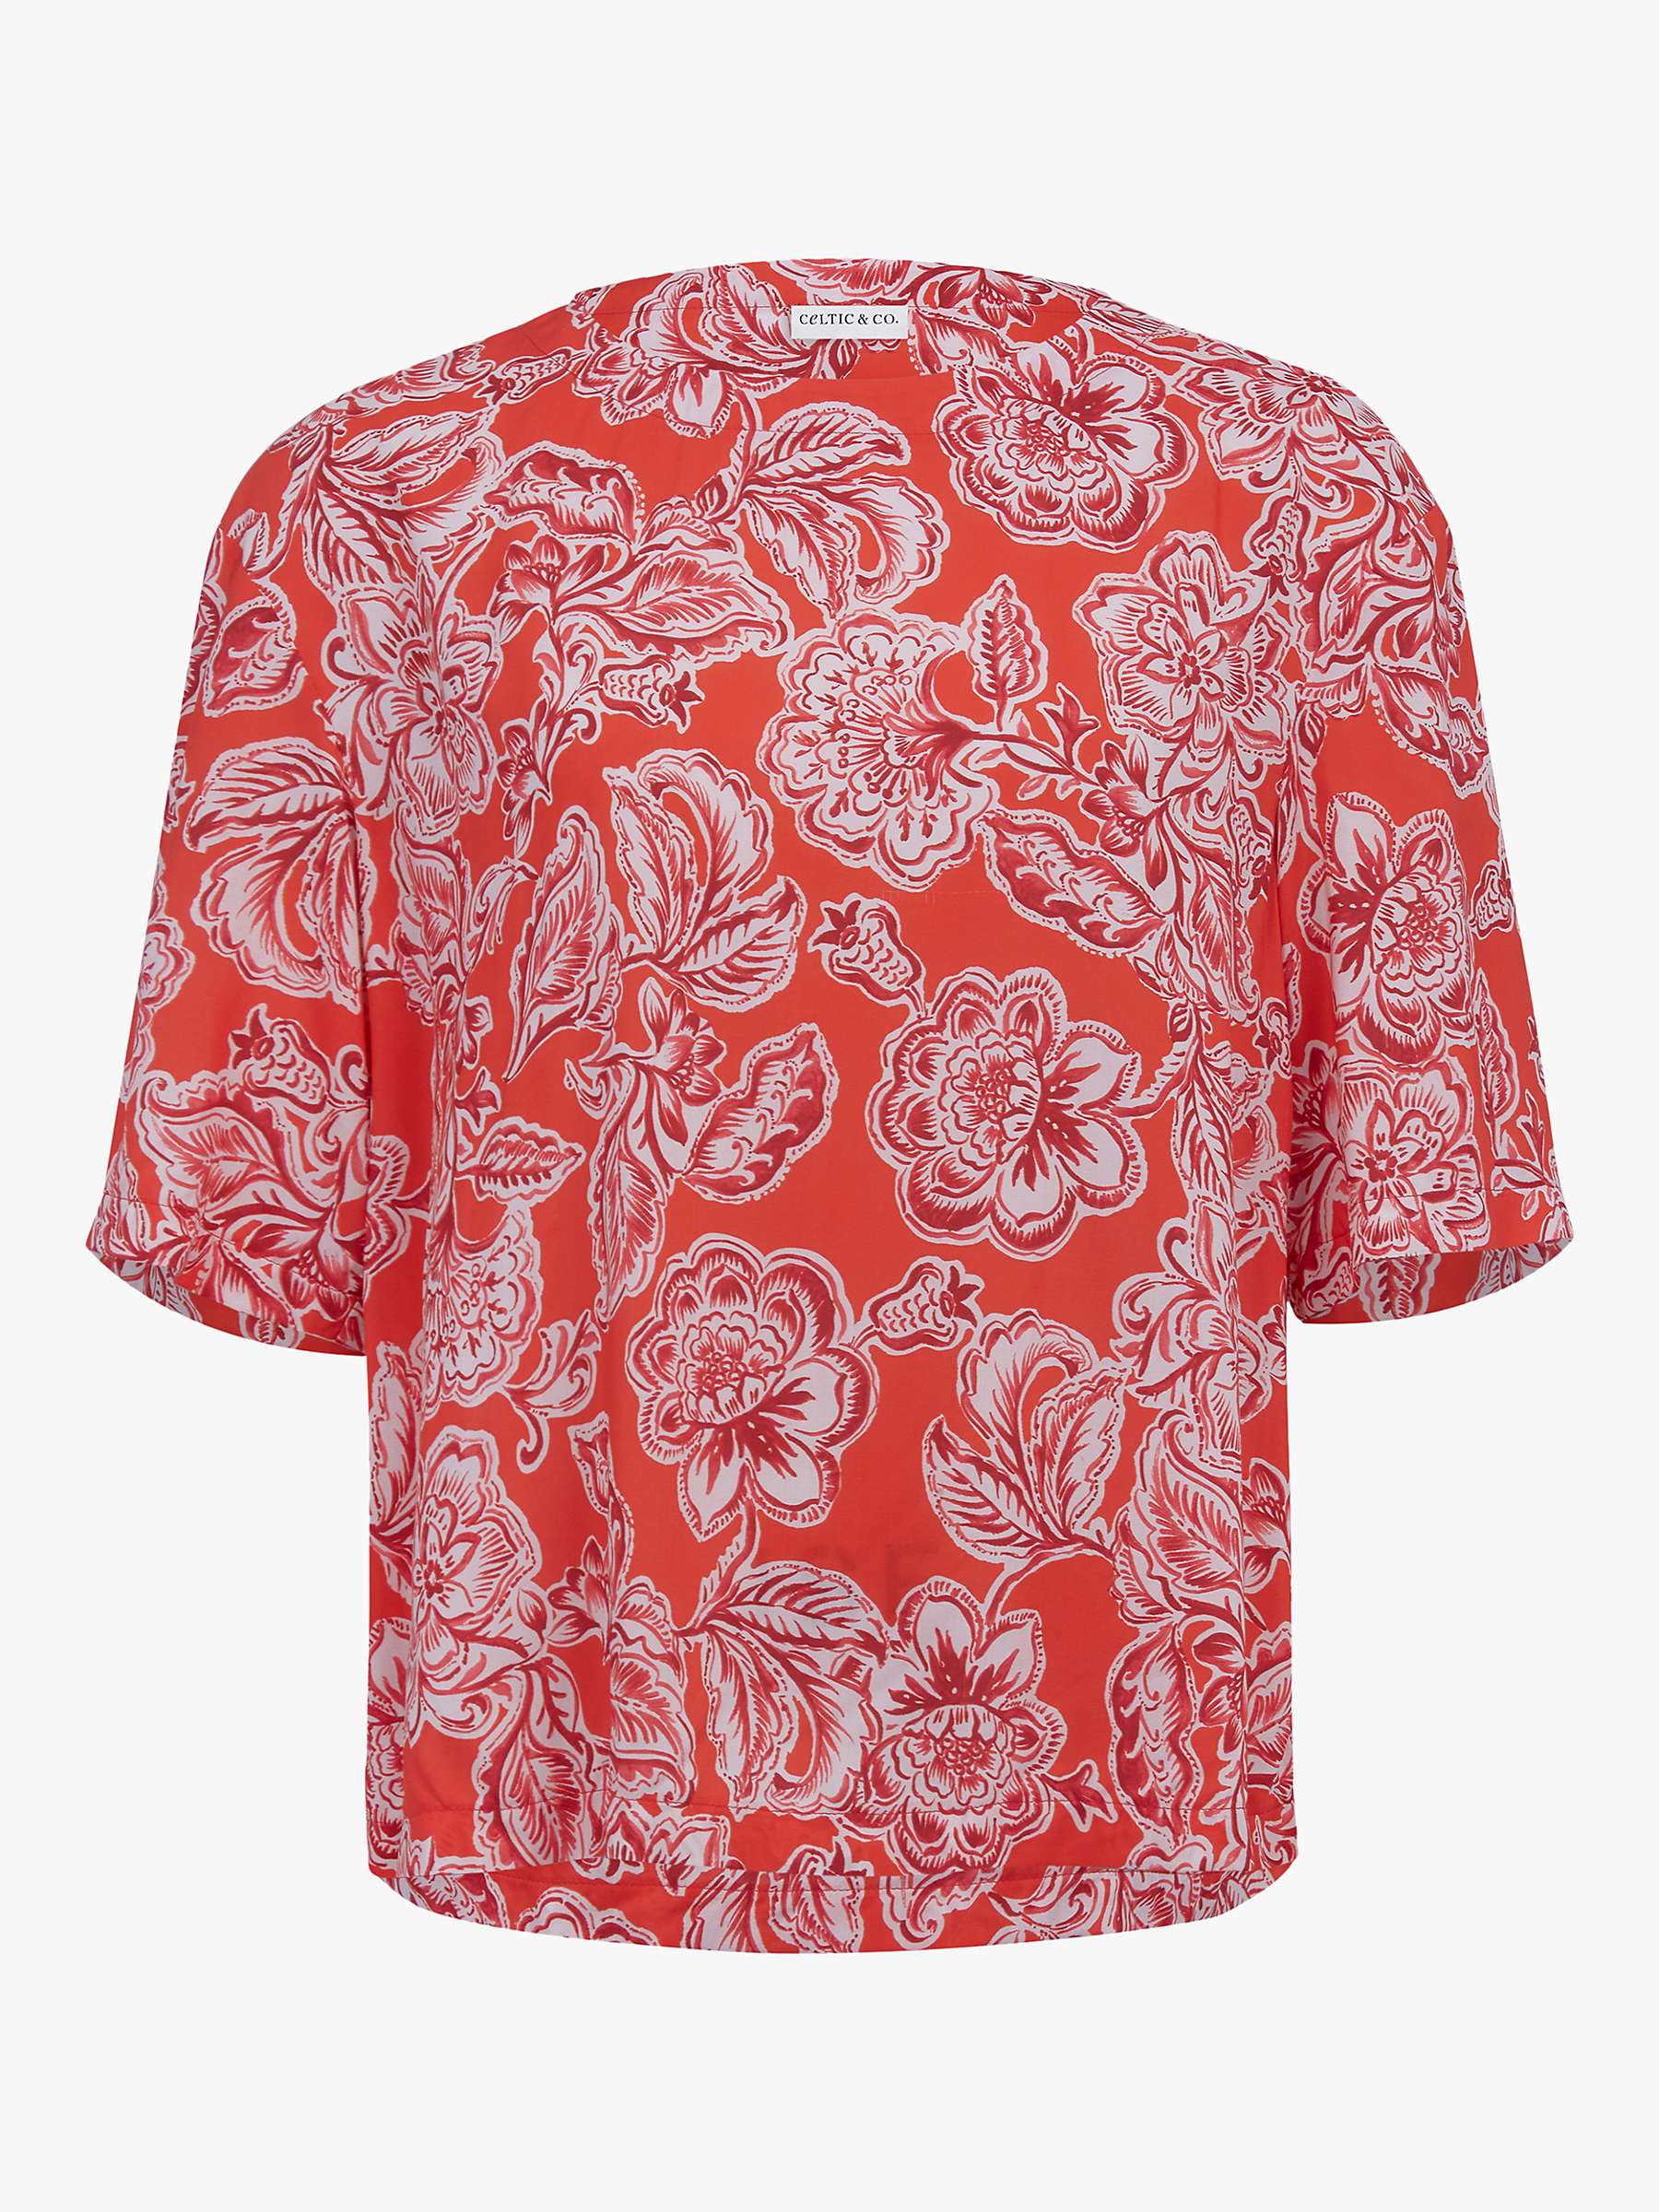 Buy Celtic & Co. Woven Relaxed T-Shirt, Chilli Floral Online at johnlewis.com